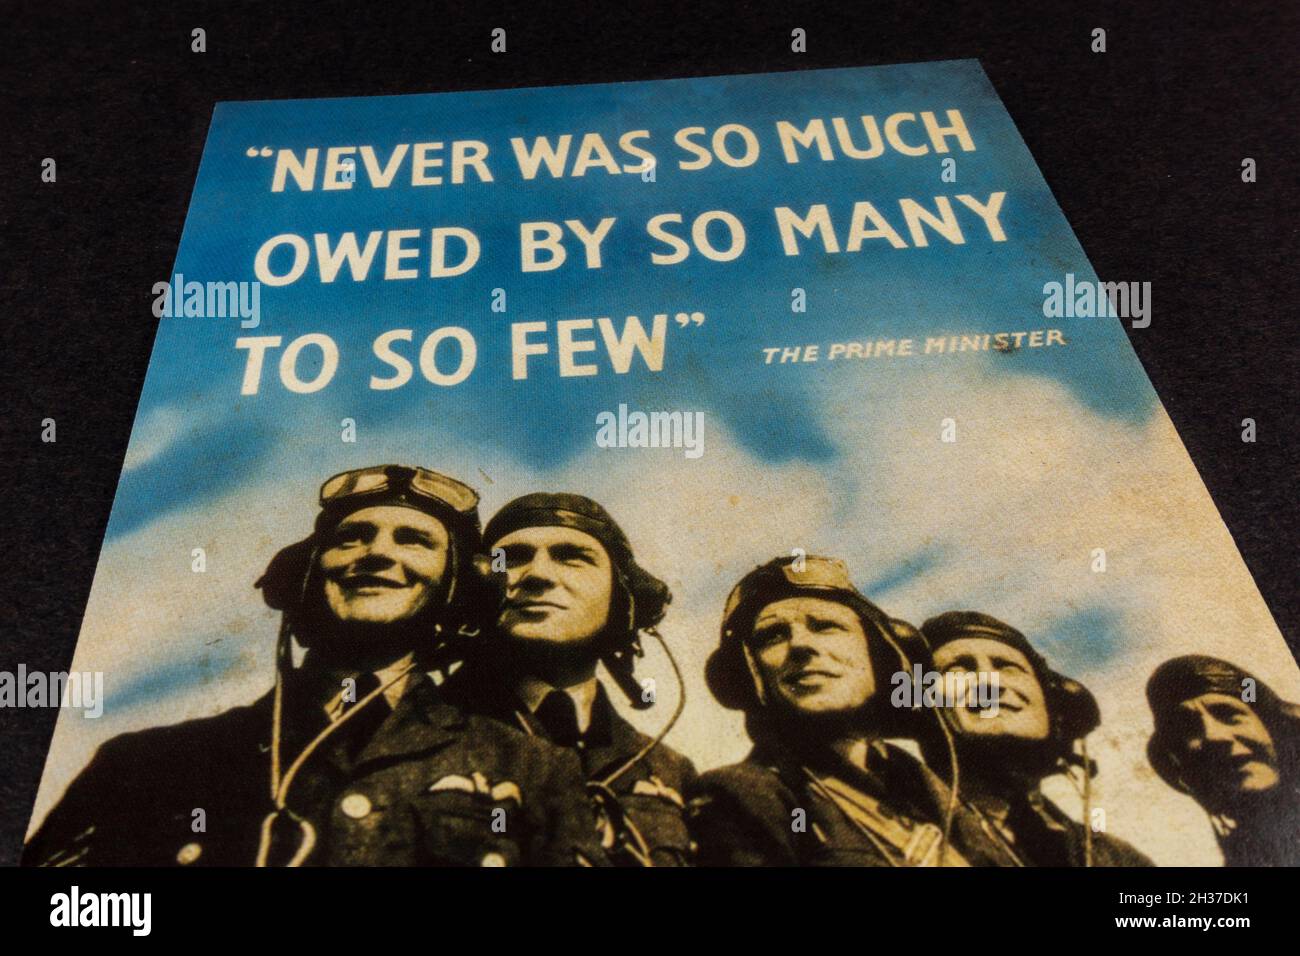 Replica WWII/Battle of Britain propaganda poster 'Never was so much owed by so many to so few', from a RAF related memorabilia pack. Stock Photo